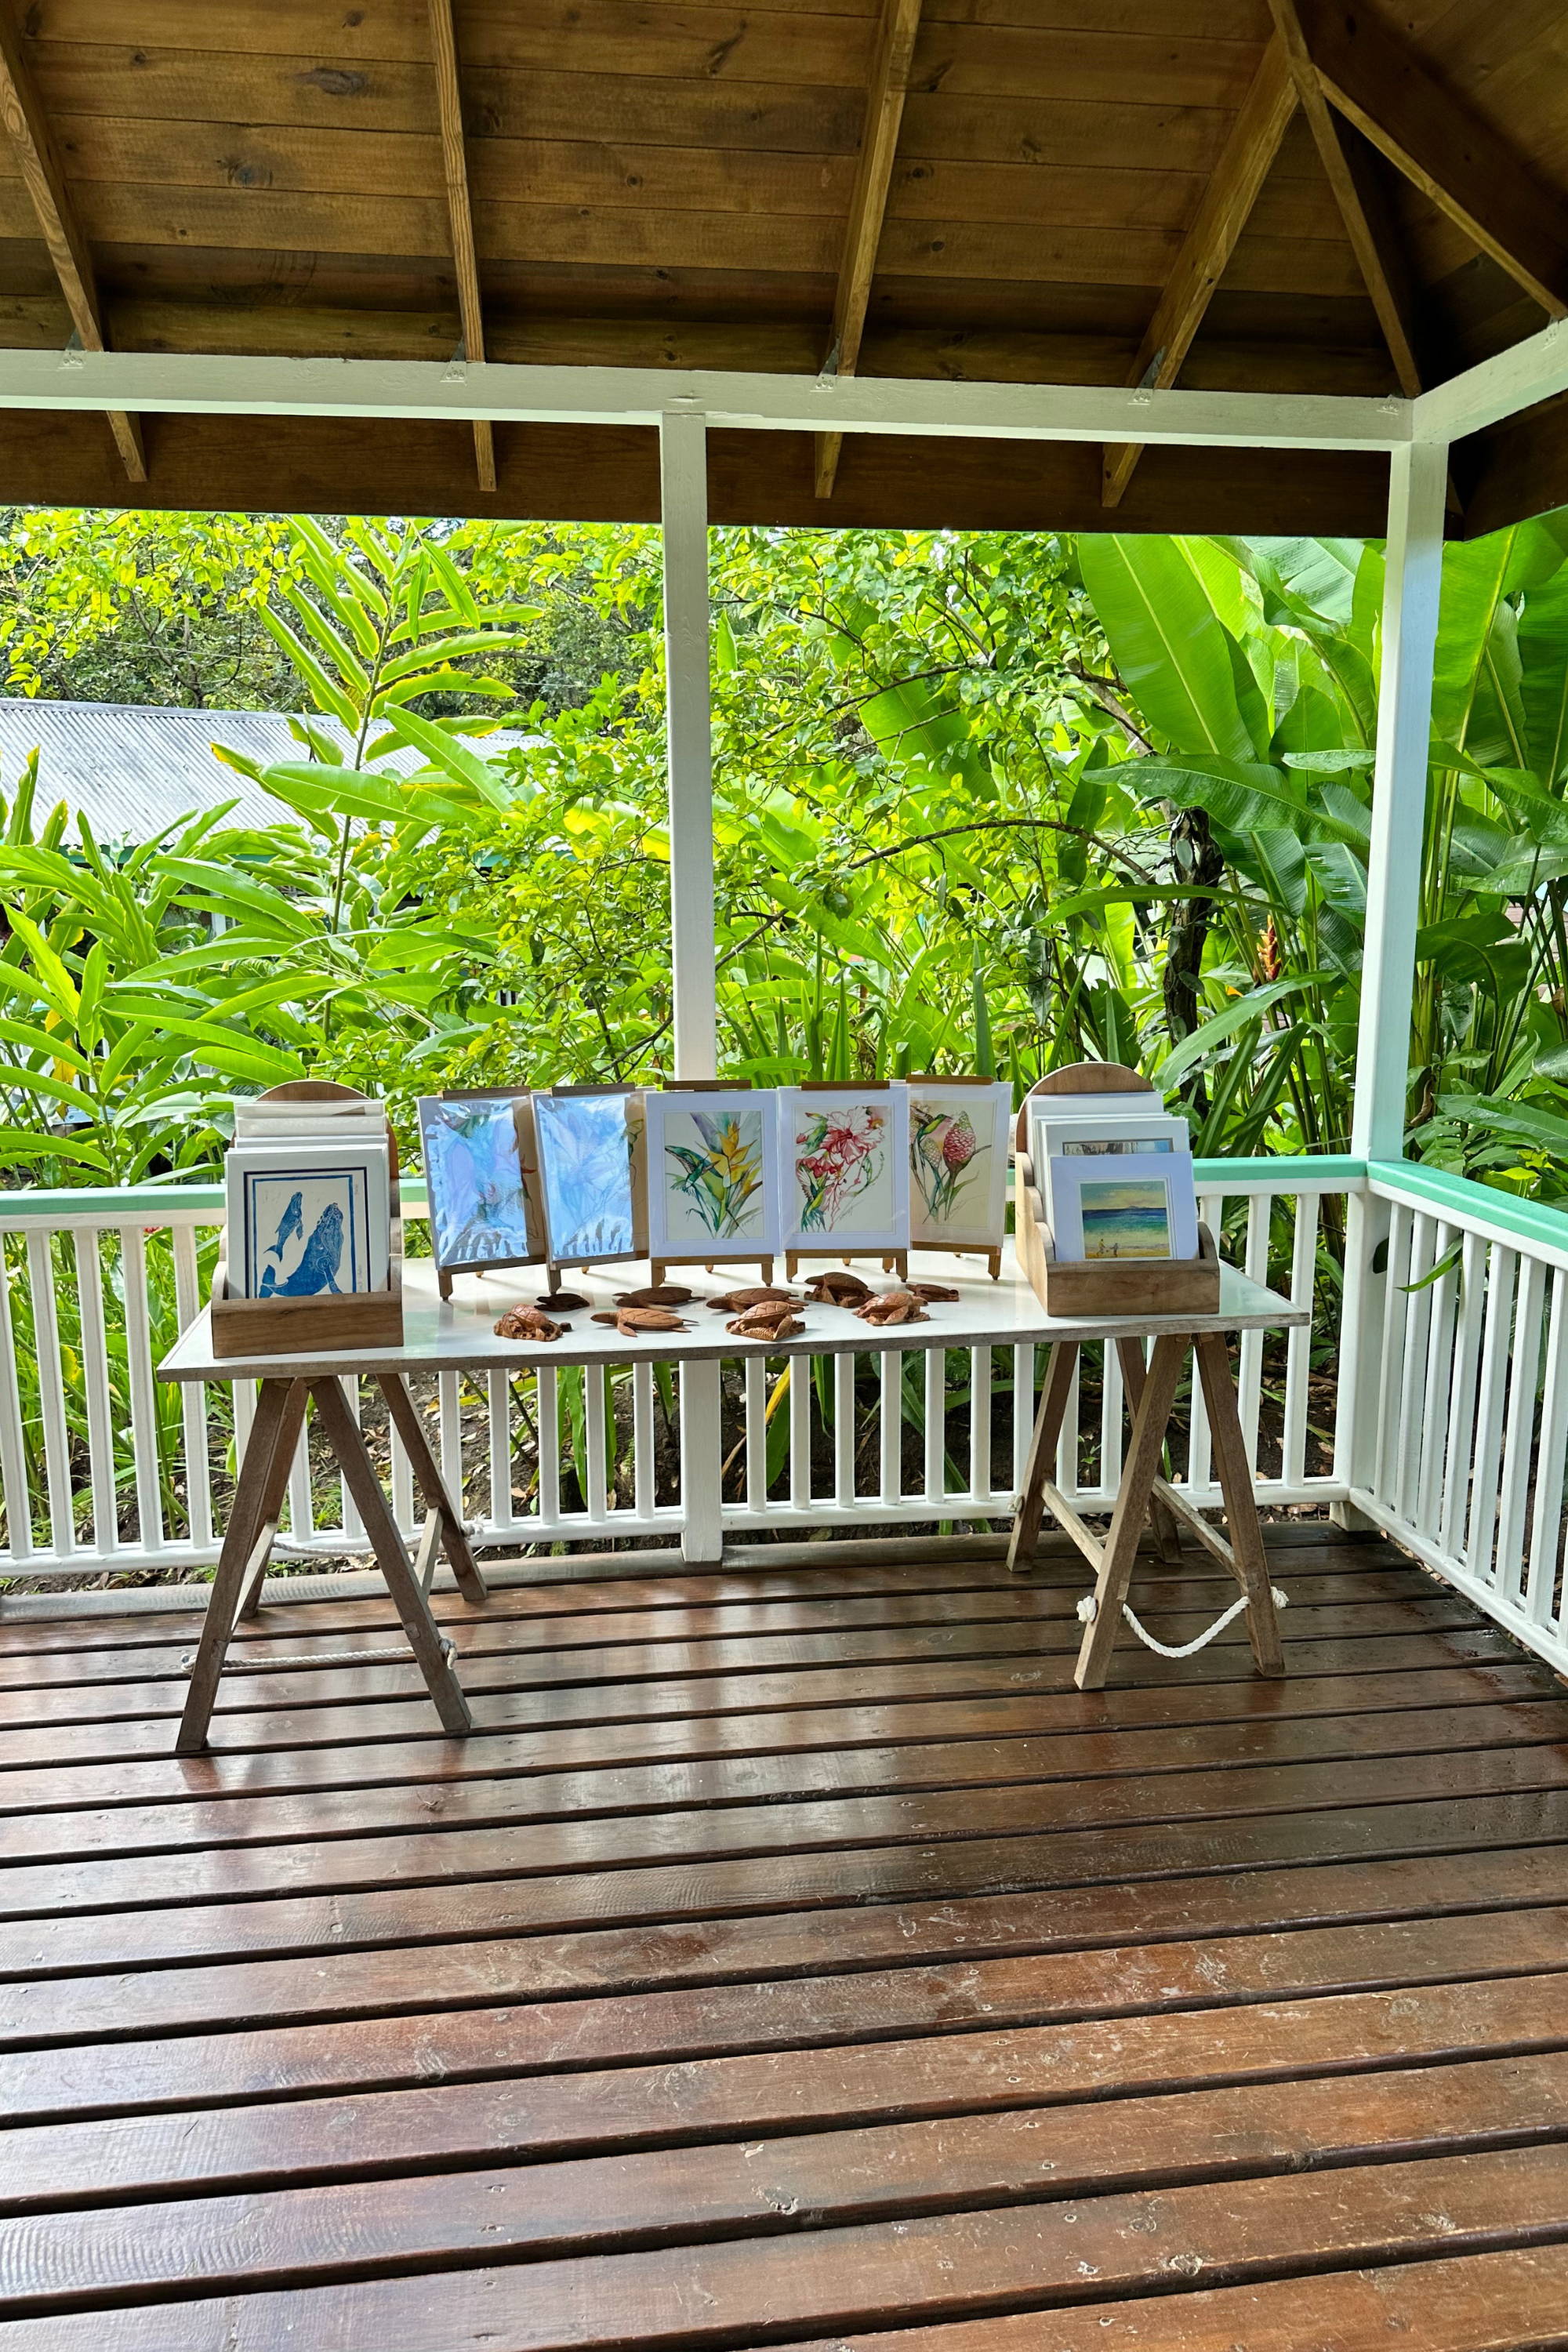 Fig Tree Gallery in Antigua in the Caribbean